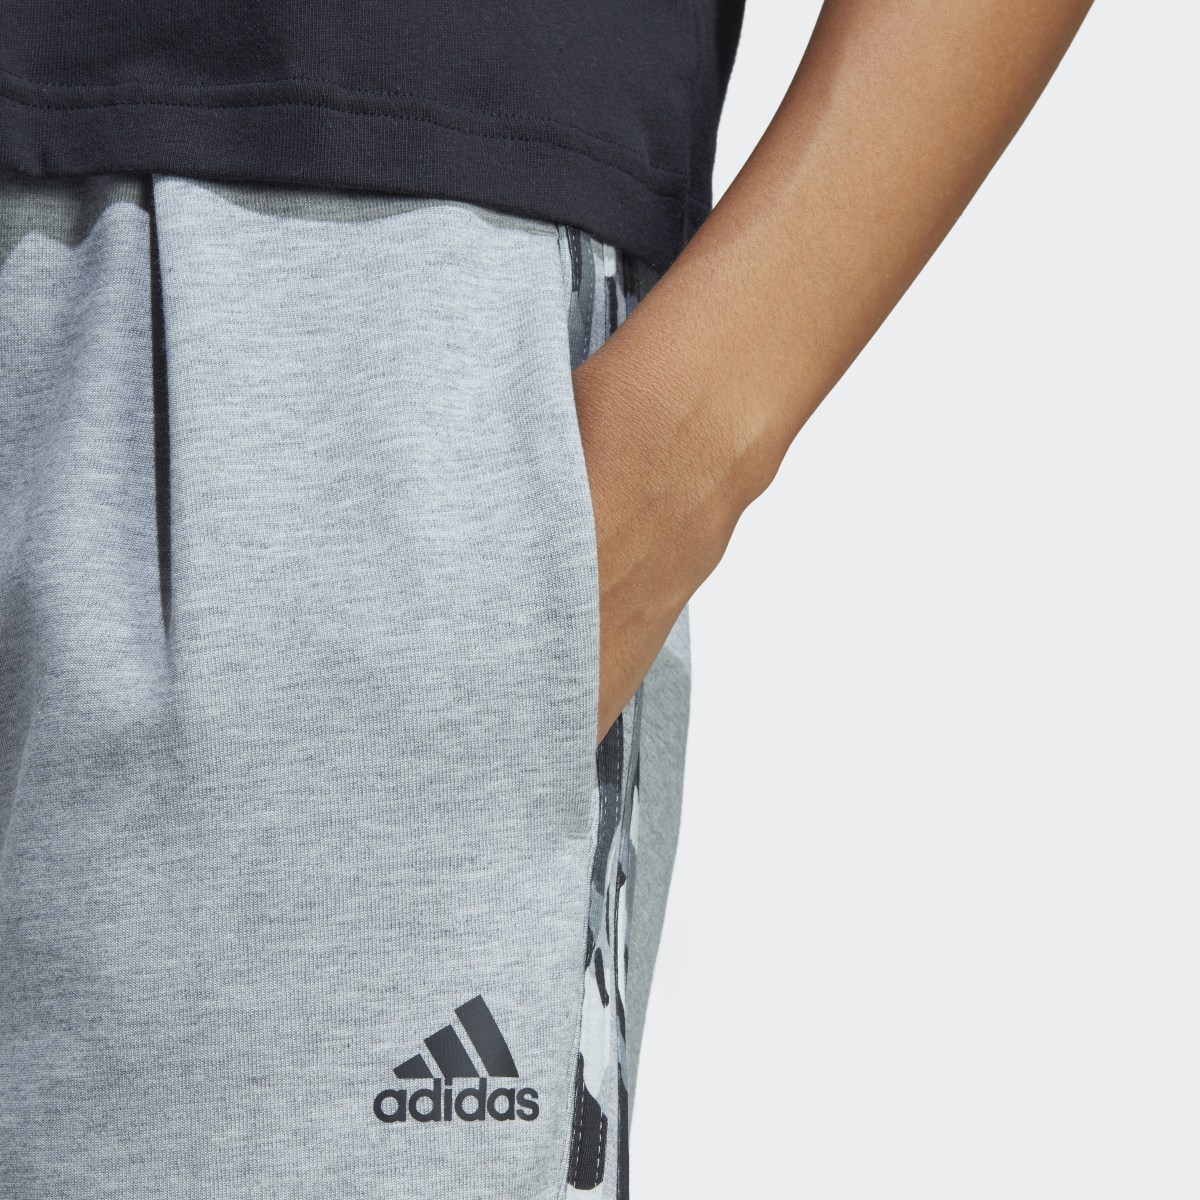 Adidas Graphic Tracksuit Bottoms. 6